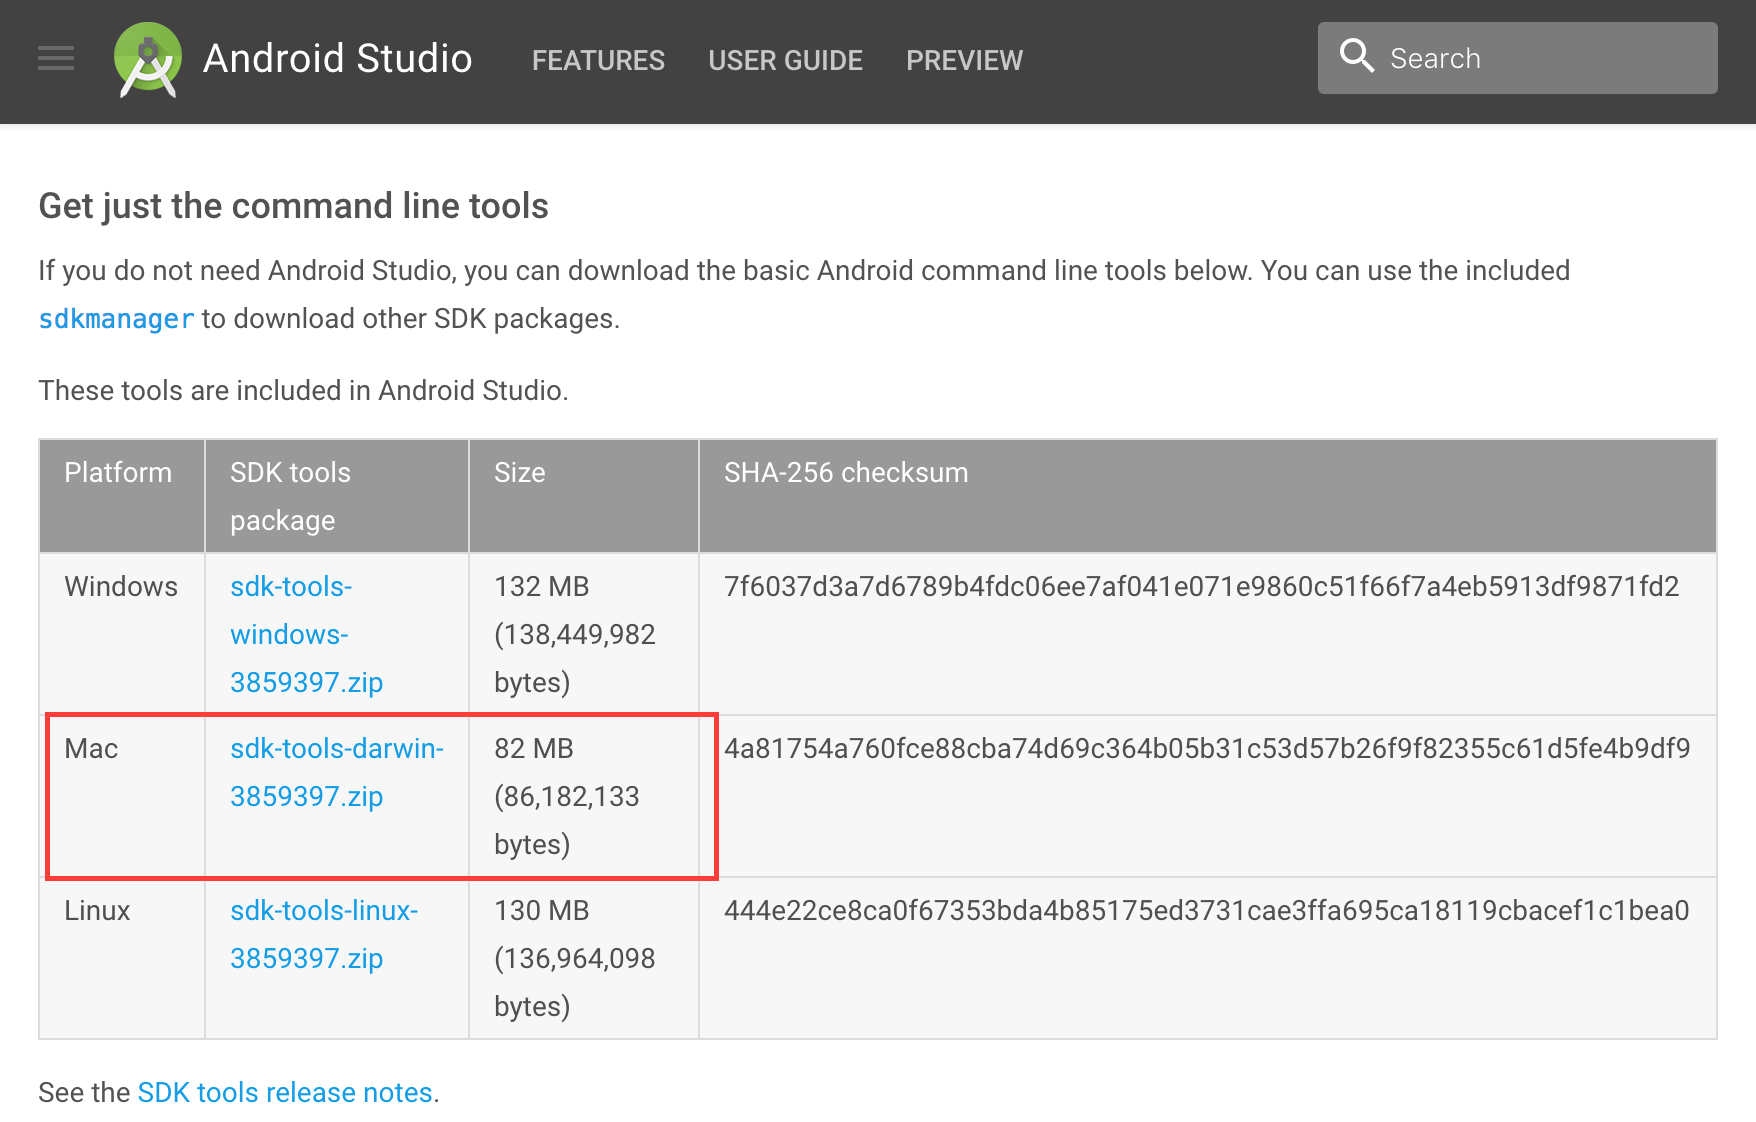 android sdk build tools download